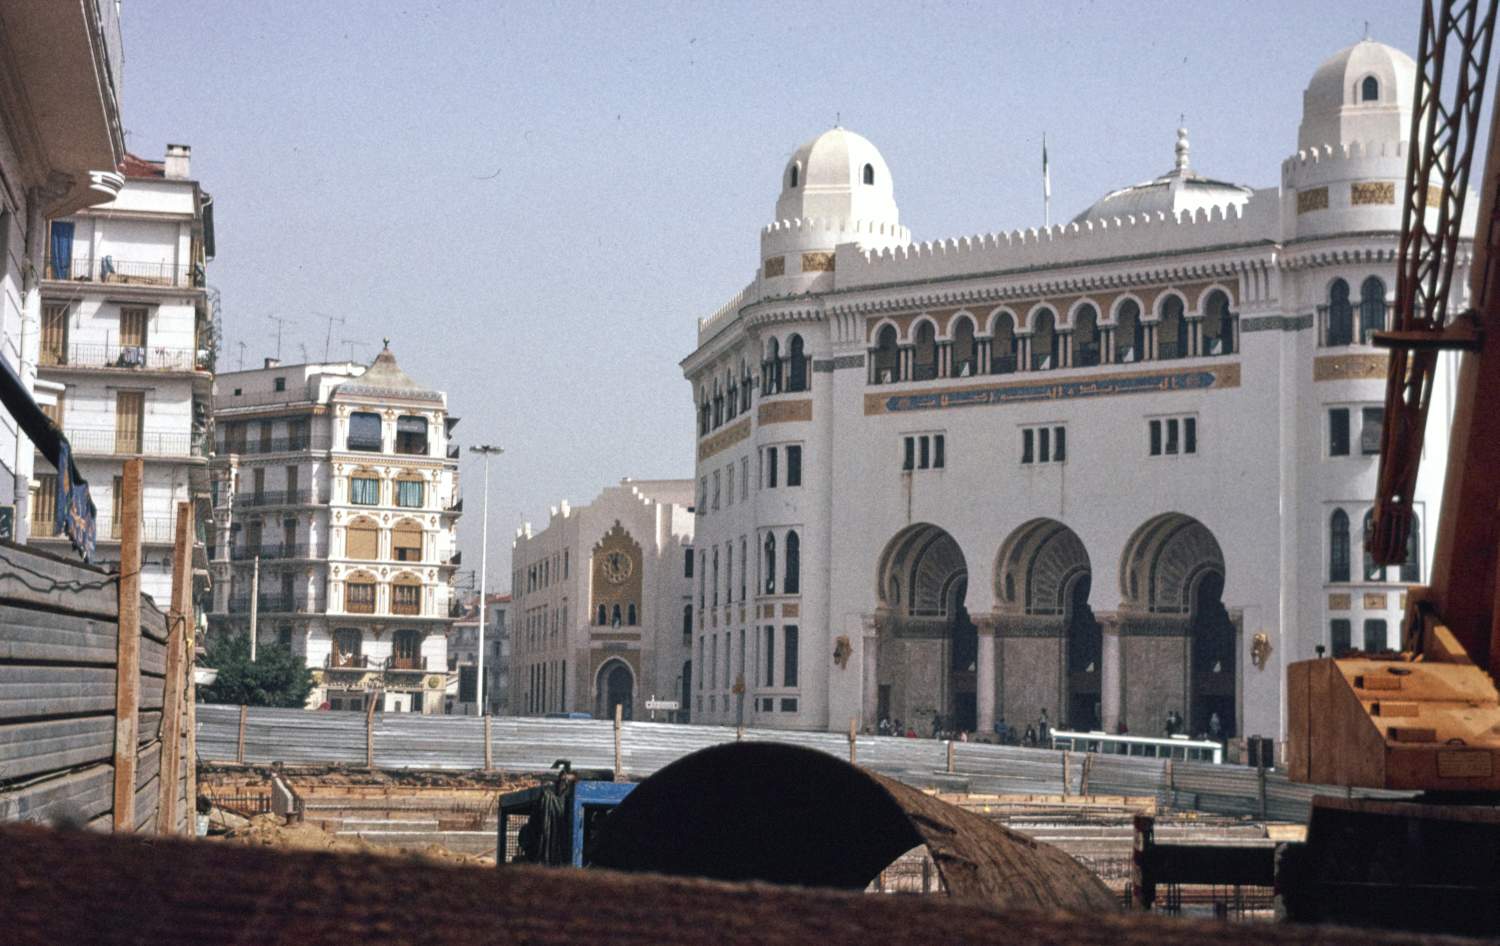 View of facade from construction